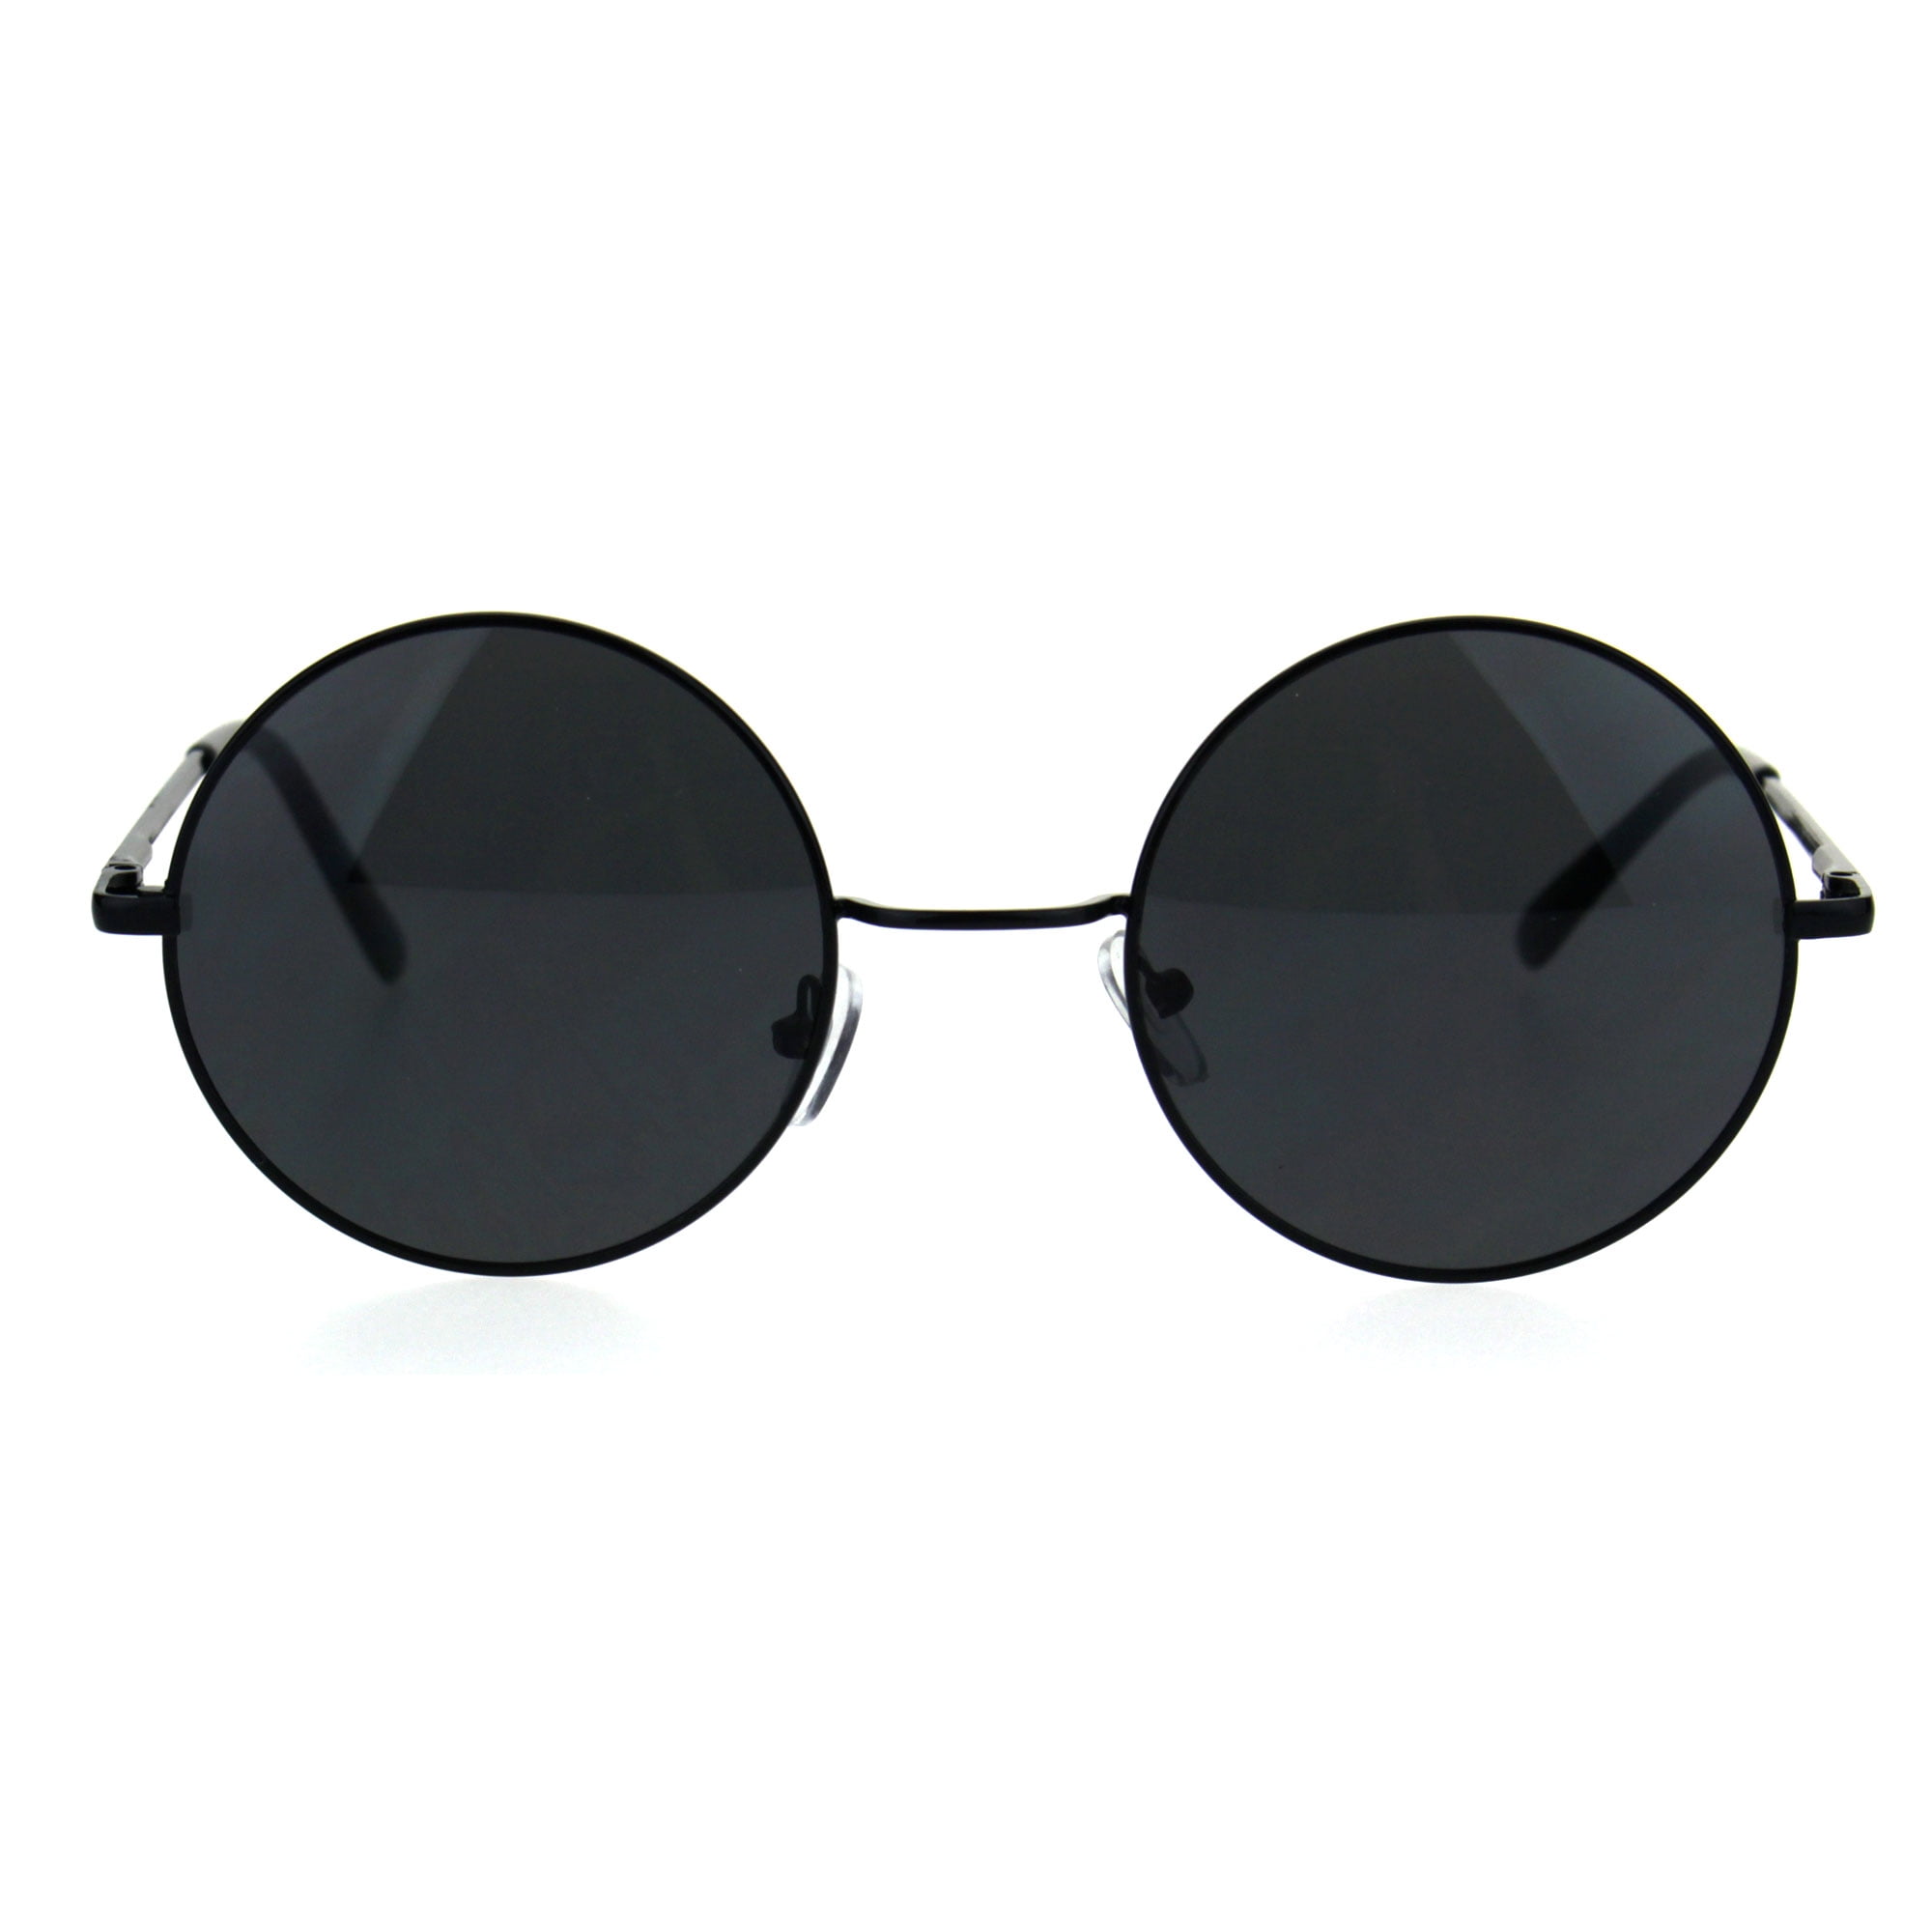 Guide to Round Sunglasses for Men, Guides